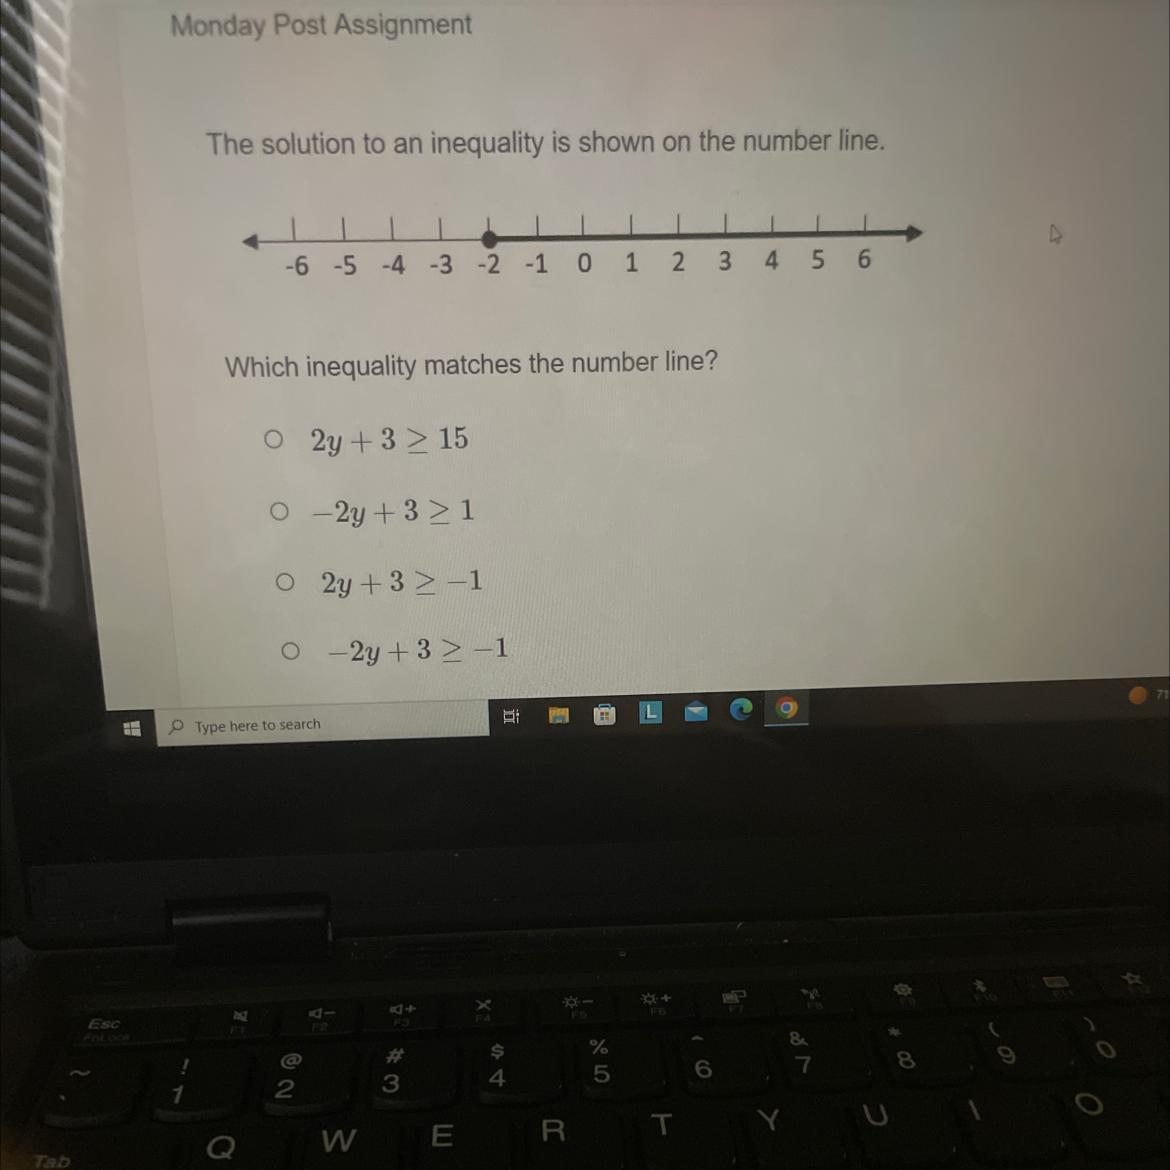 Please Answer The Solution To An Inequality Is Shown On The Number Line.Which Inequality Matches The